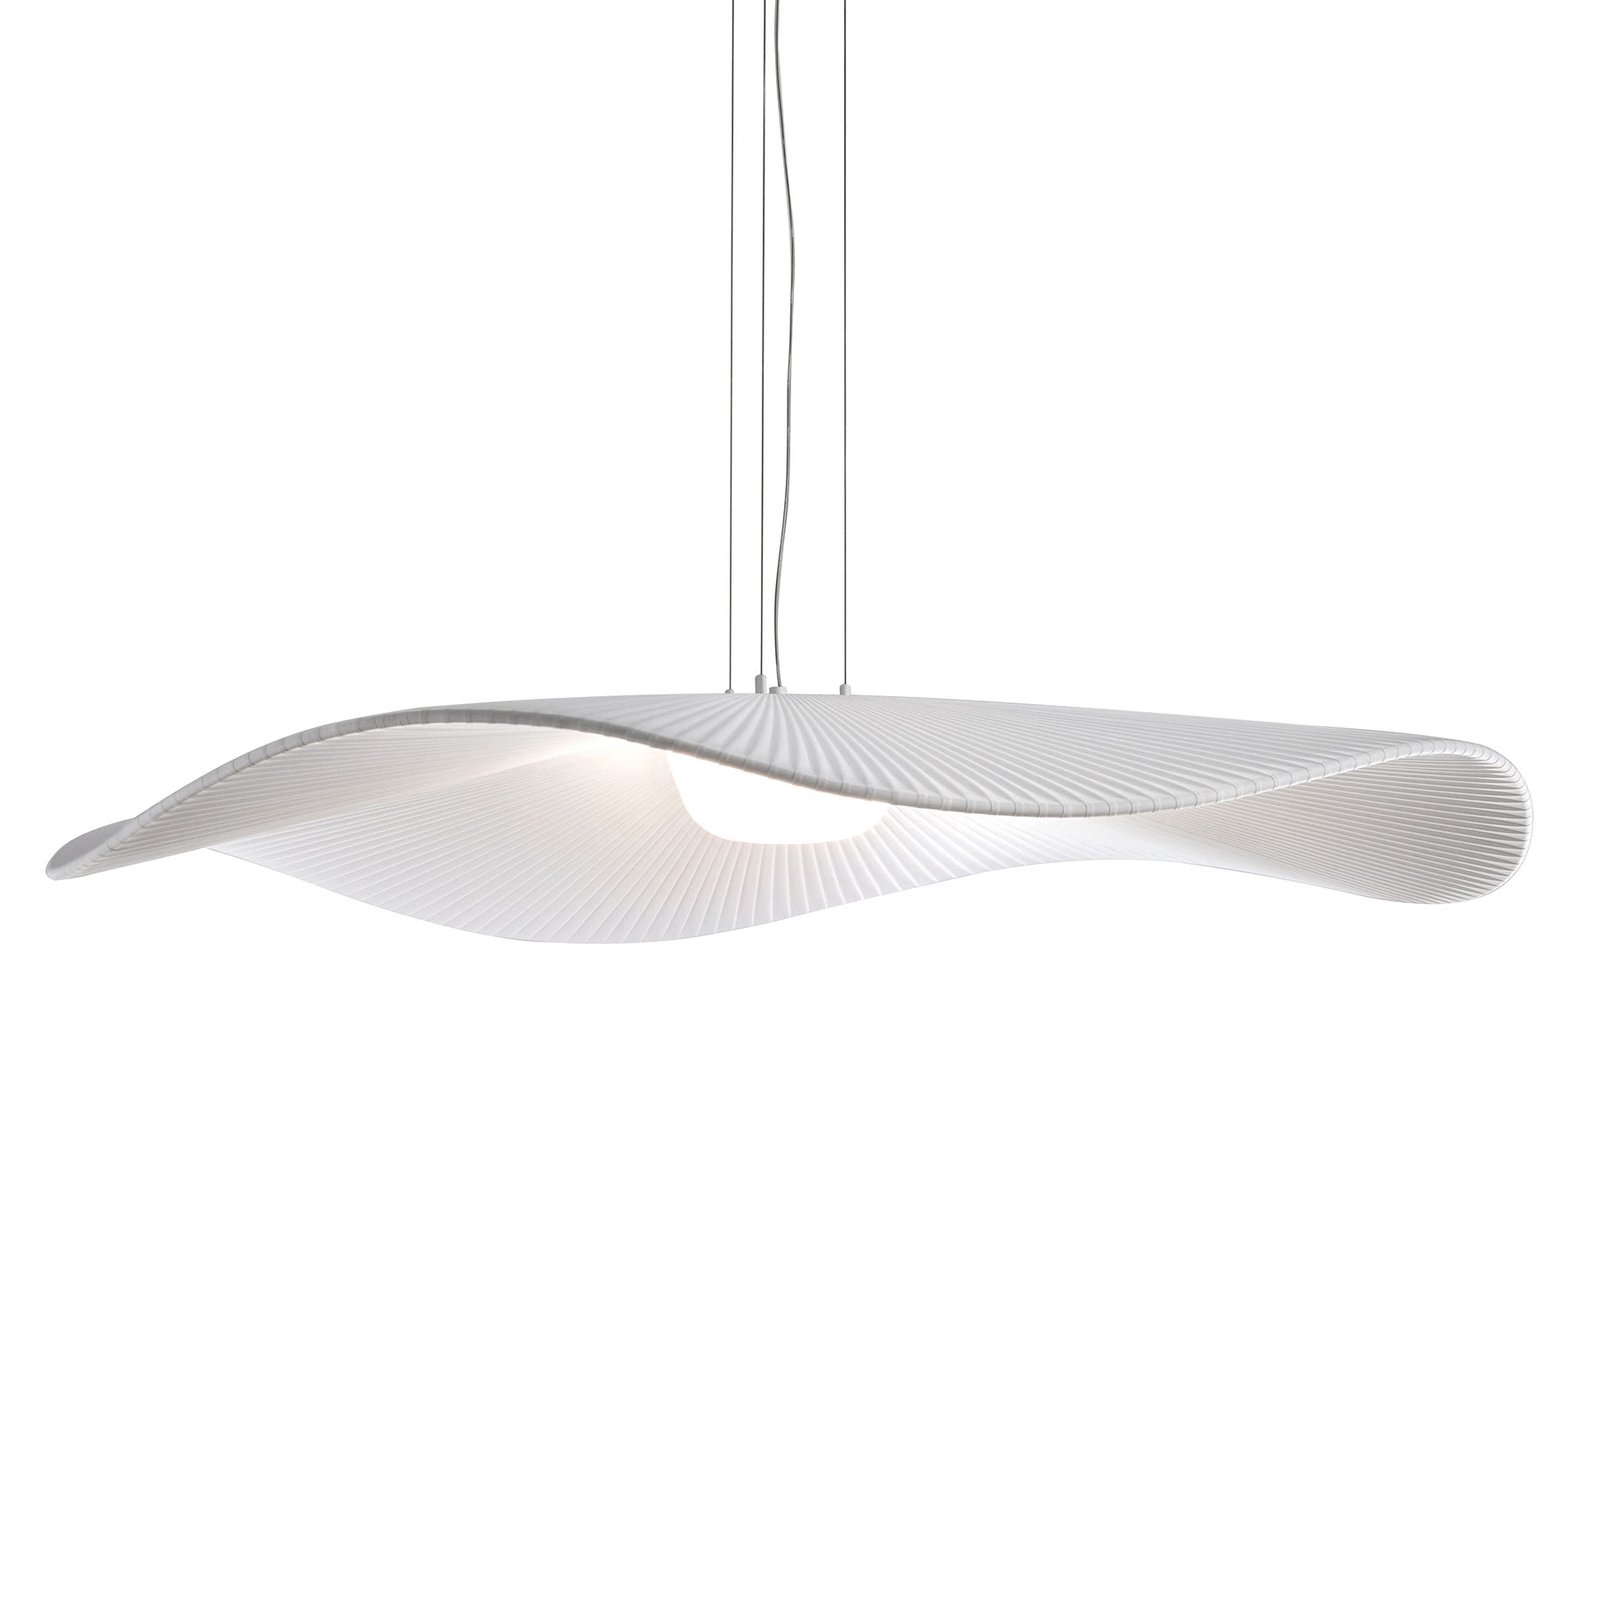 Bover Mediterrània suspension LED blanche dimmable